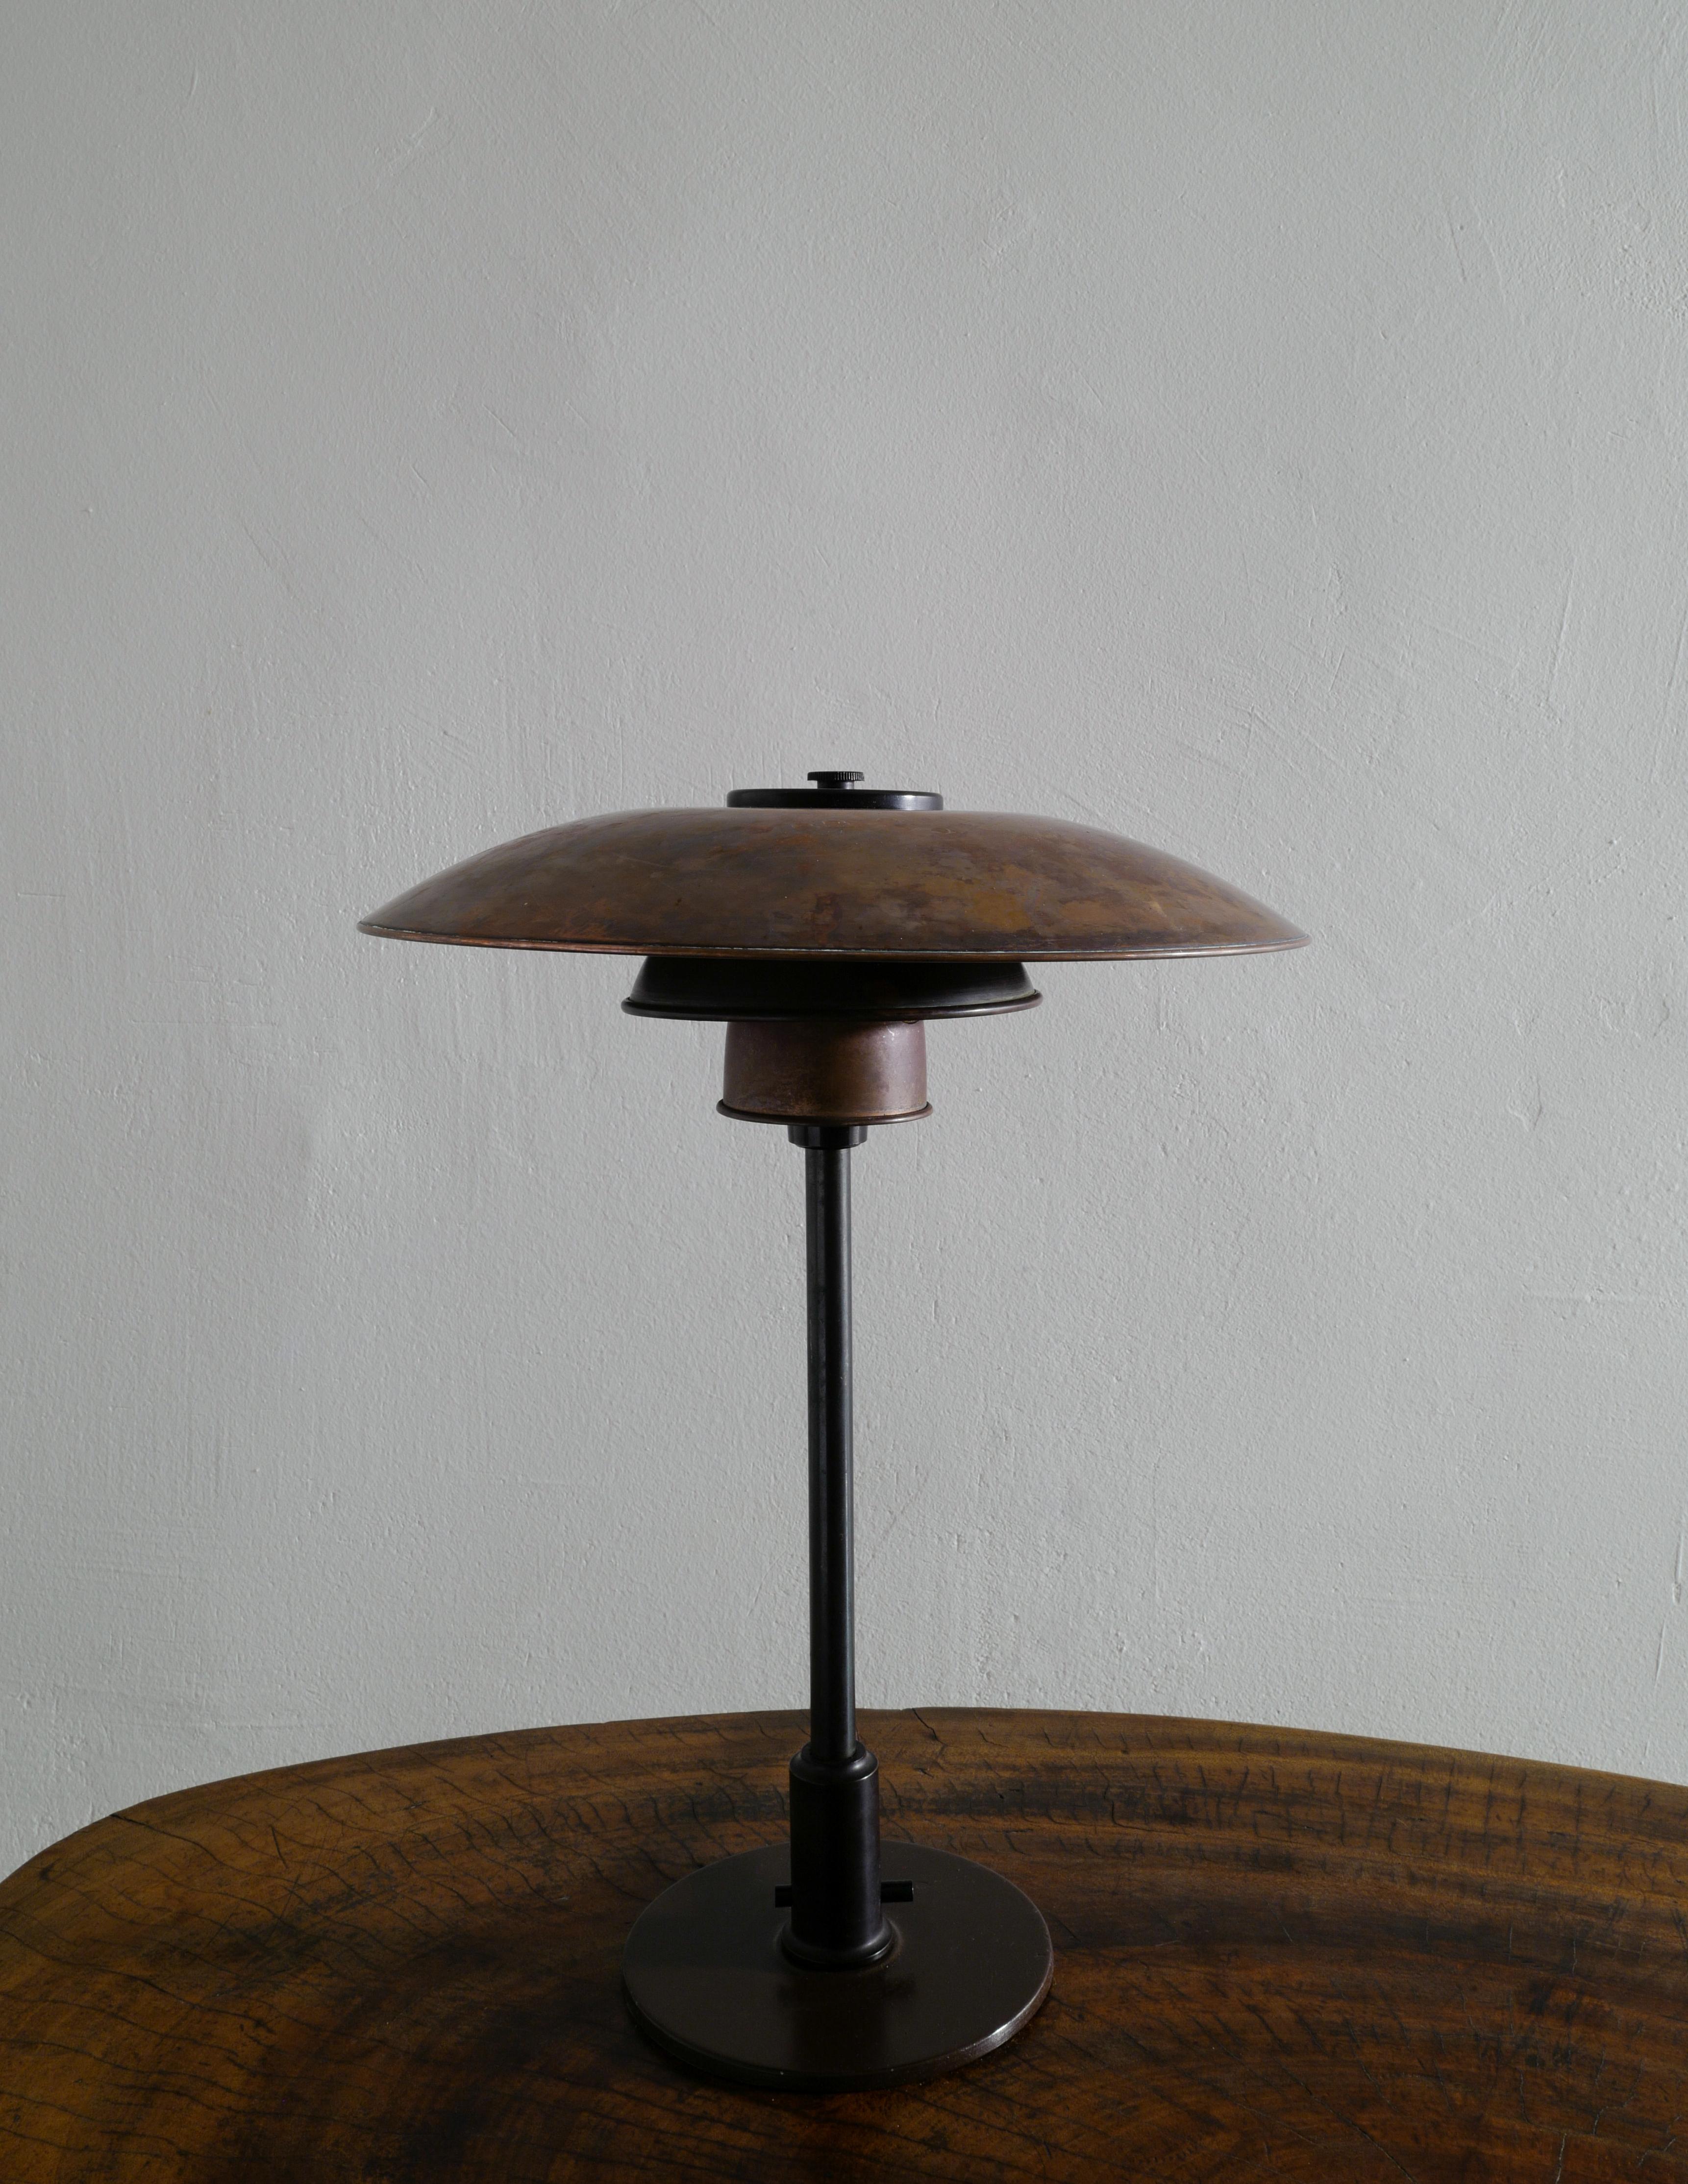 Very rare table desk lamp in brass, copper and bakelite details designed by Poul Henningsen and produced by Louis Poulsen Denmark in the late 1920s / early 1930s. In good vintage and original condition with signs and beautiful patina from age and